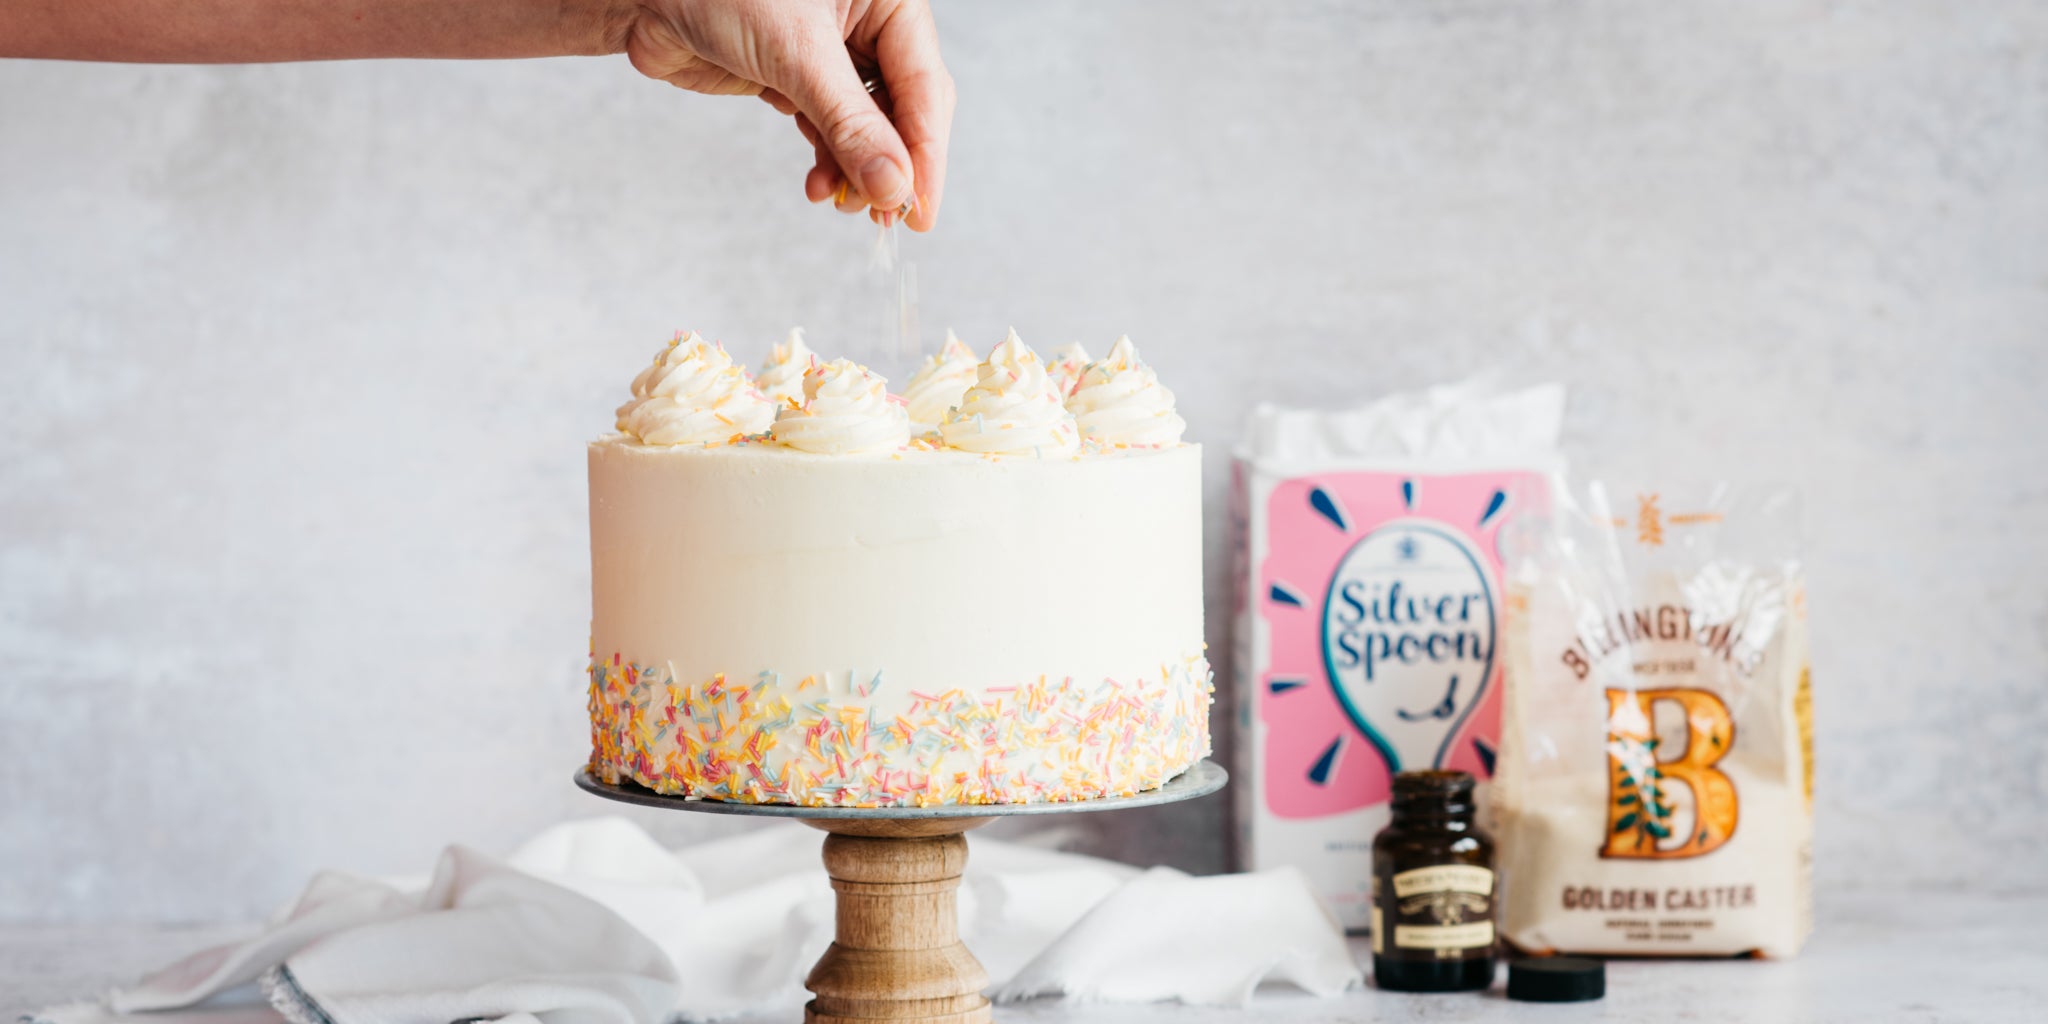 Vegan Vanilla Cake being hand sprinkled with decoration, with a bag of Silver Spoon Icing Sugar and Caster sugar in the background